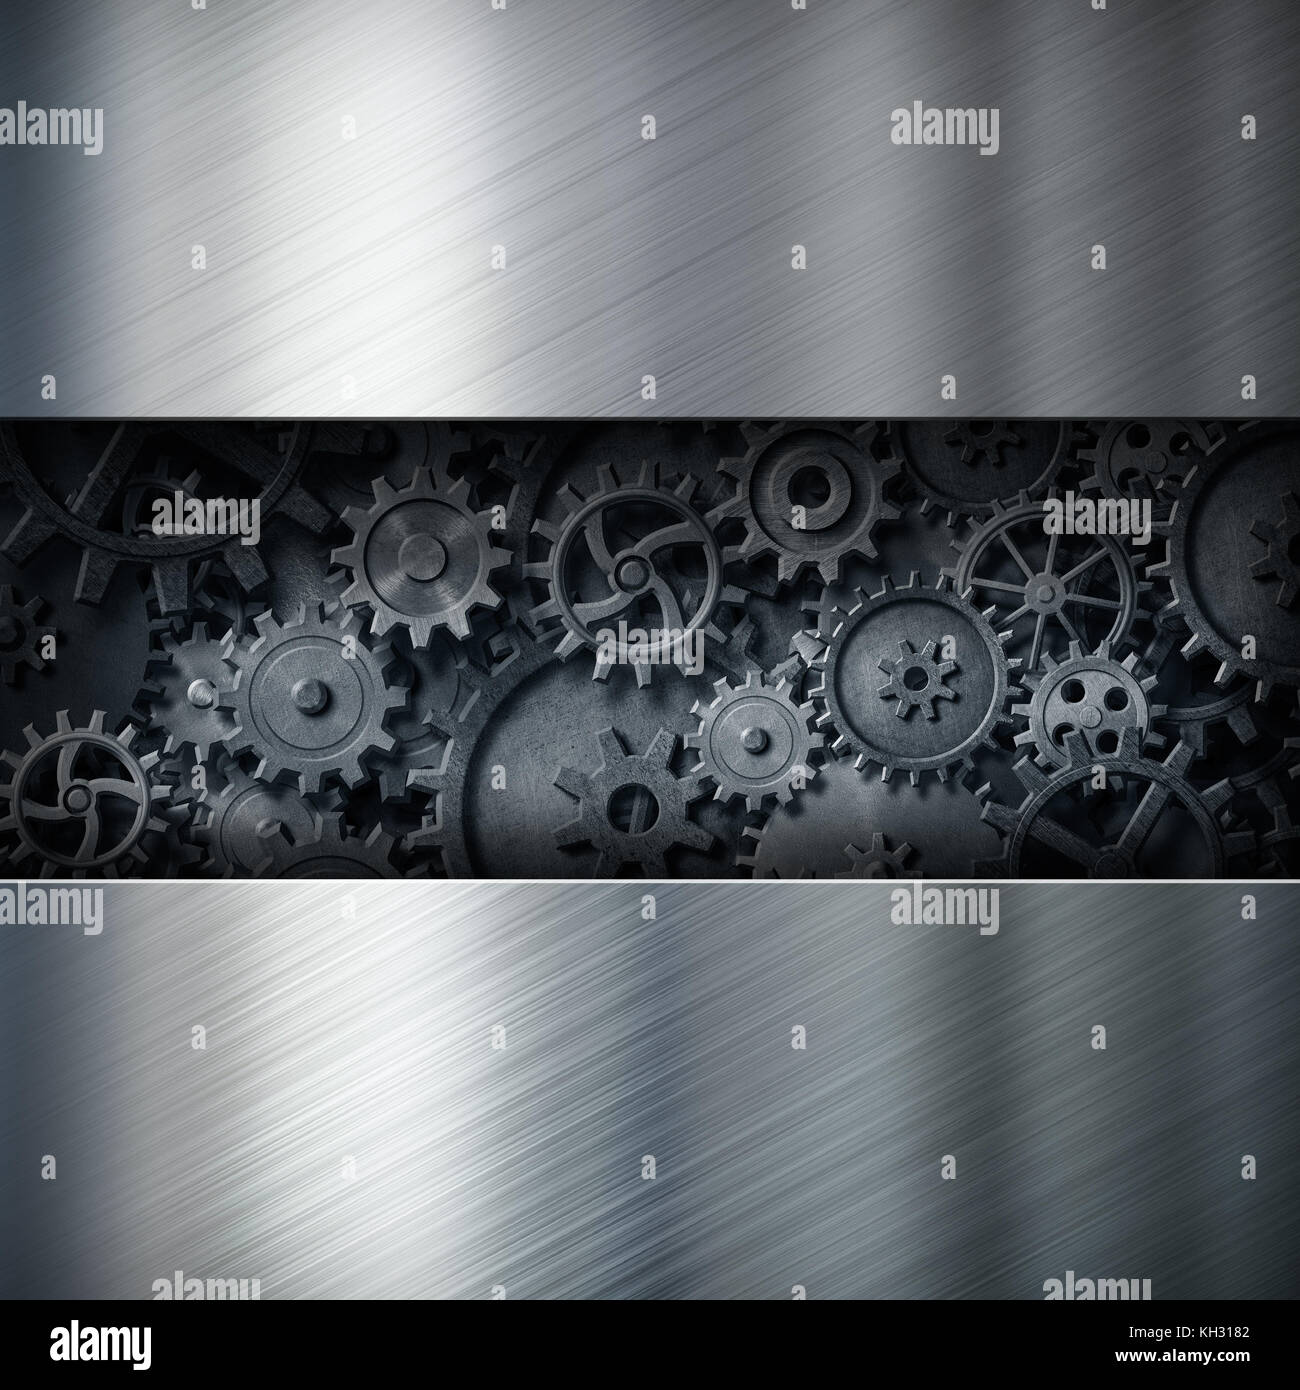 metal industrial background with cogs and gears clockwork 3d illustration Stock Photo